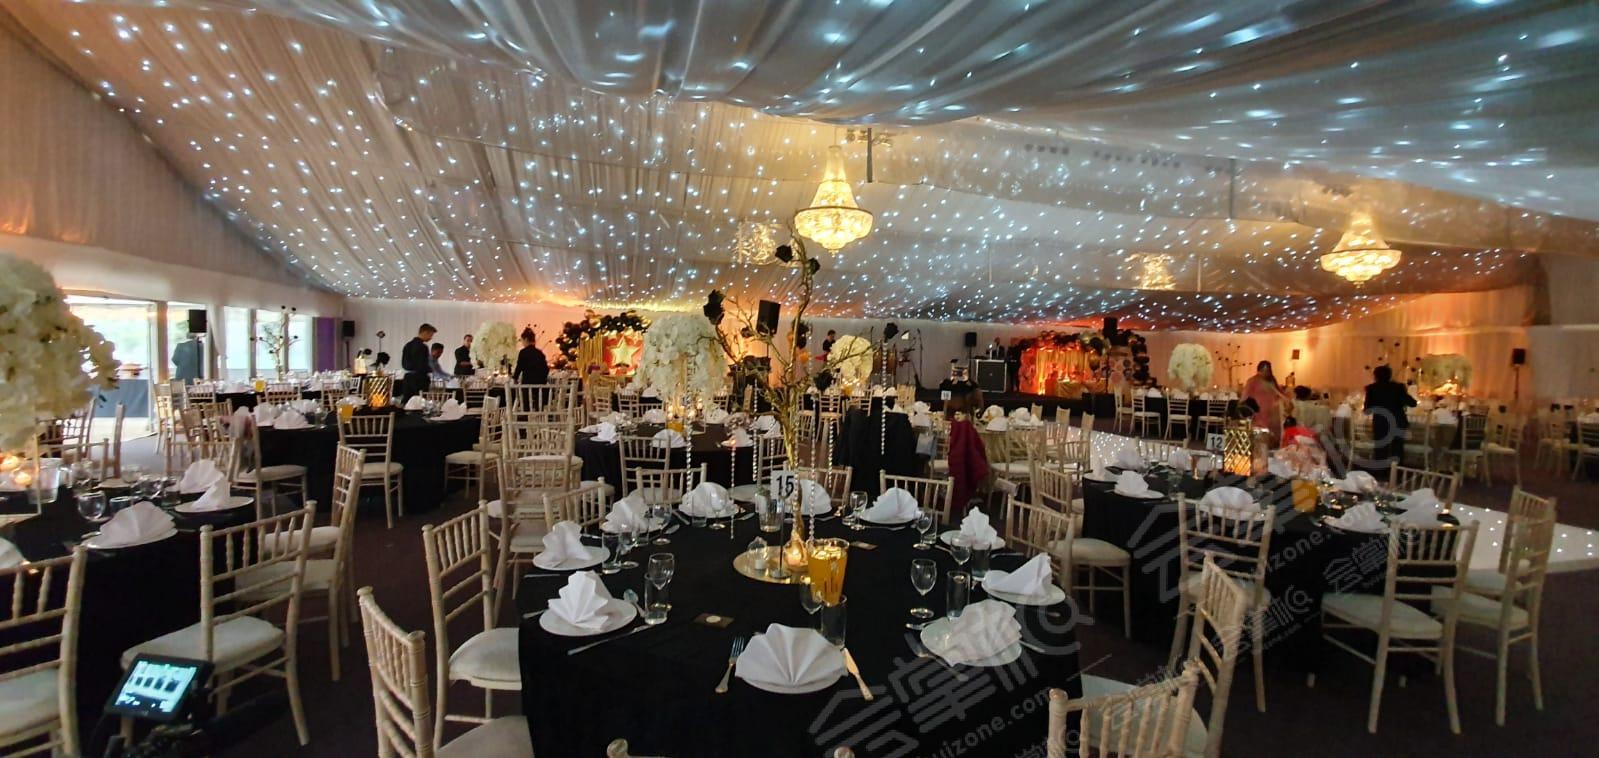 Stockley Marquee